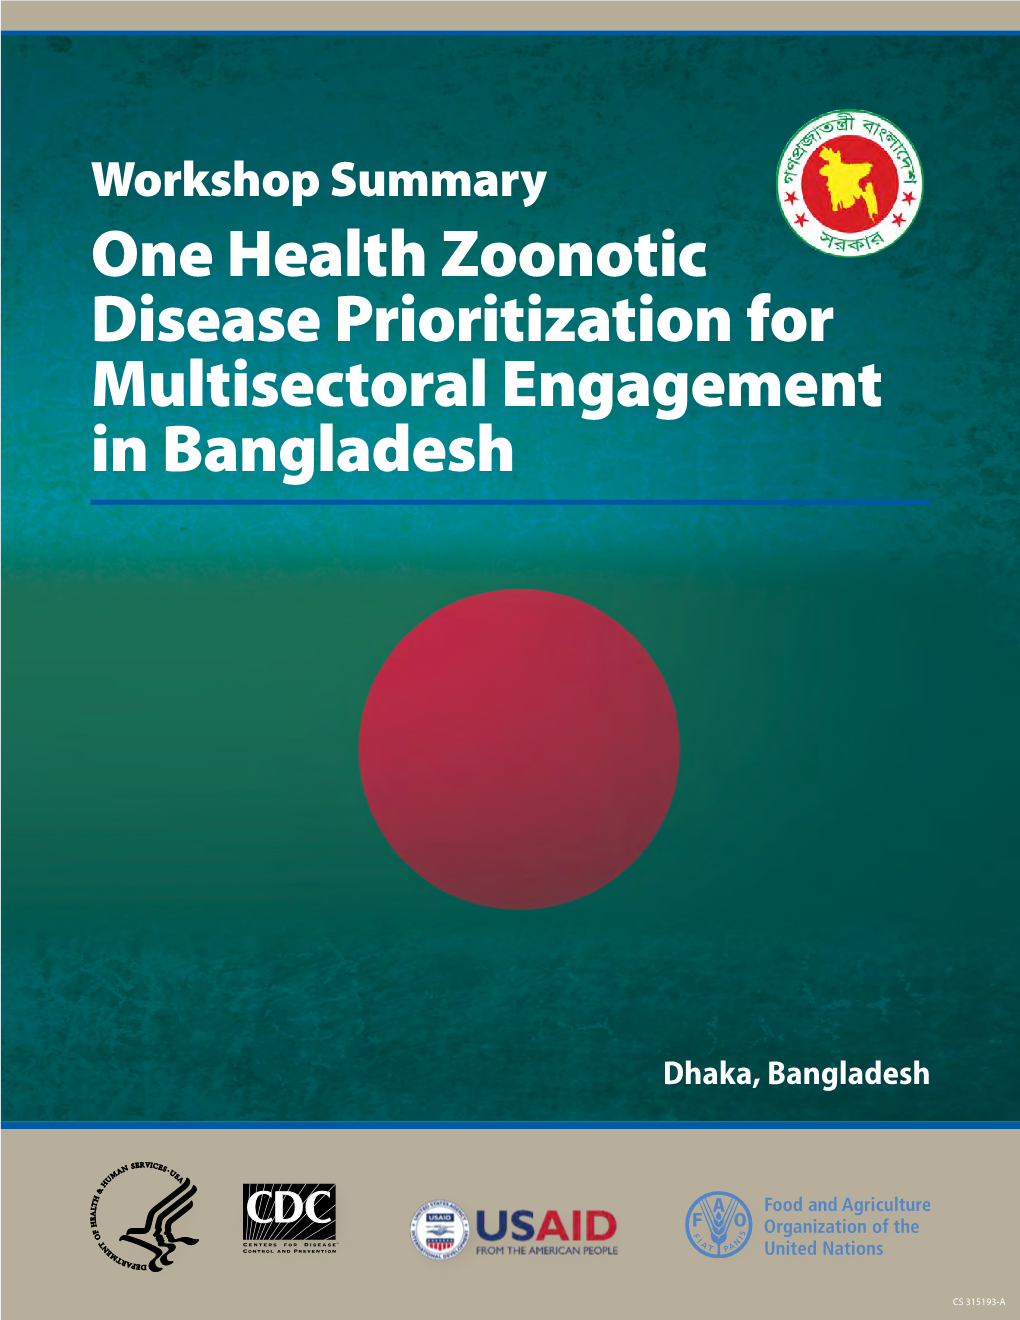 One Health Zoonotic Disease Prioritization for Multisectoral Engagement in Bangladesh